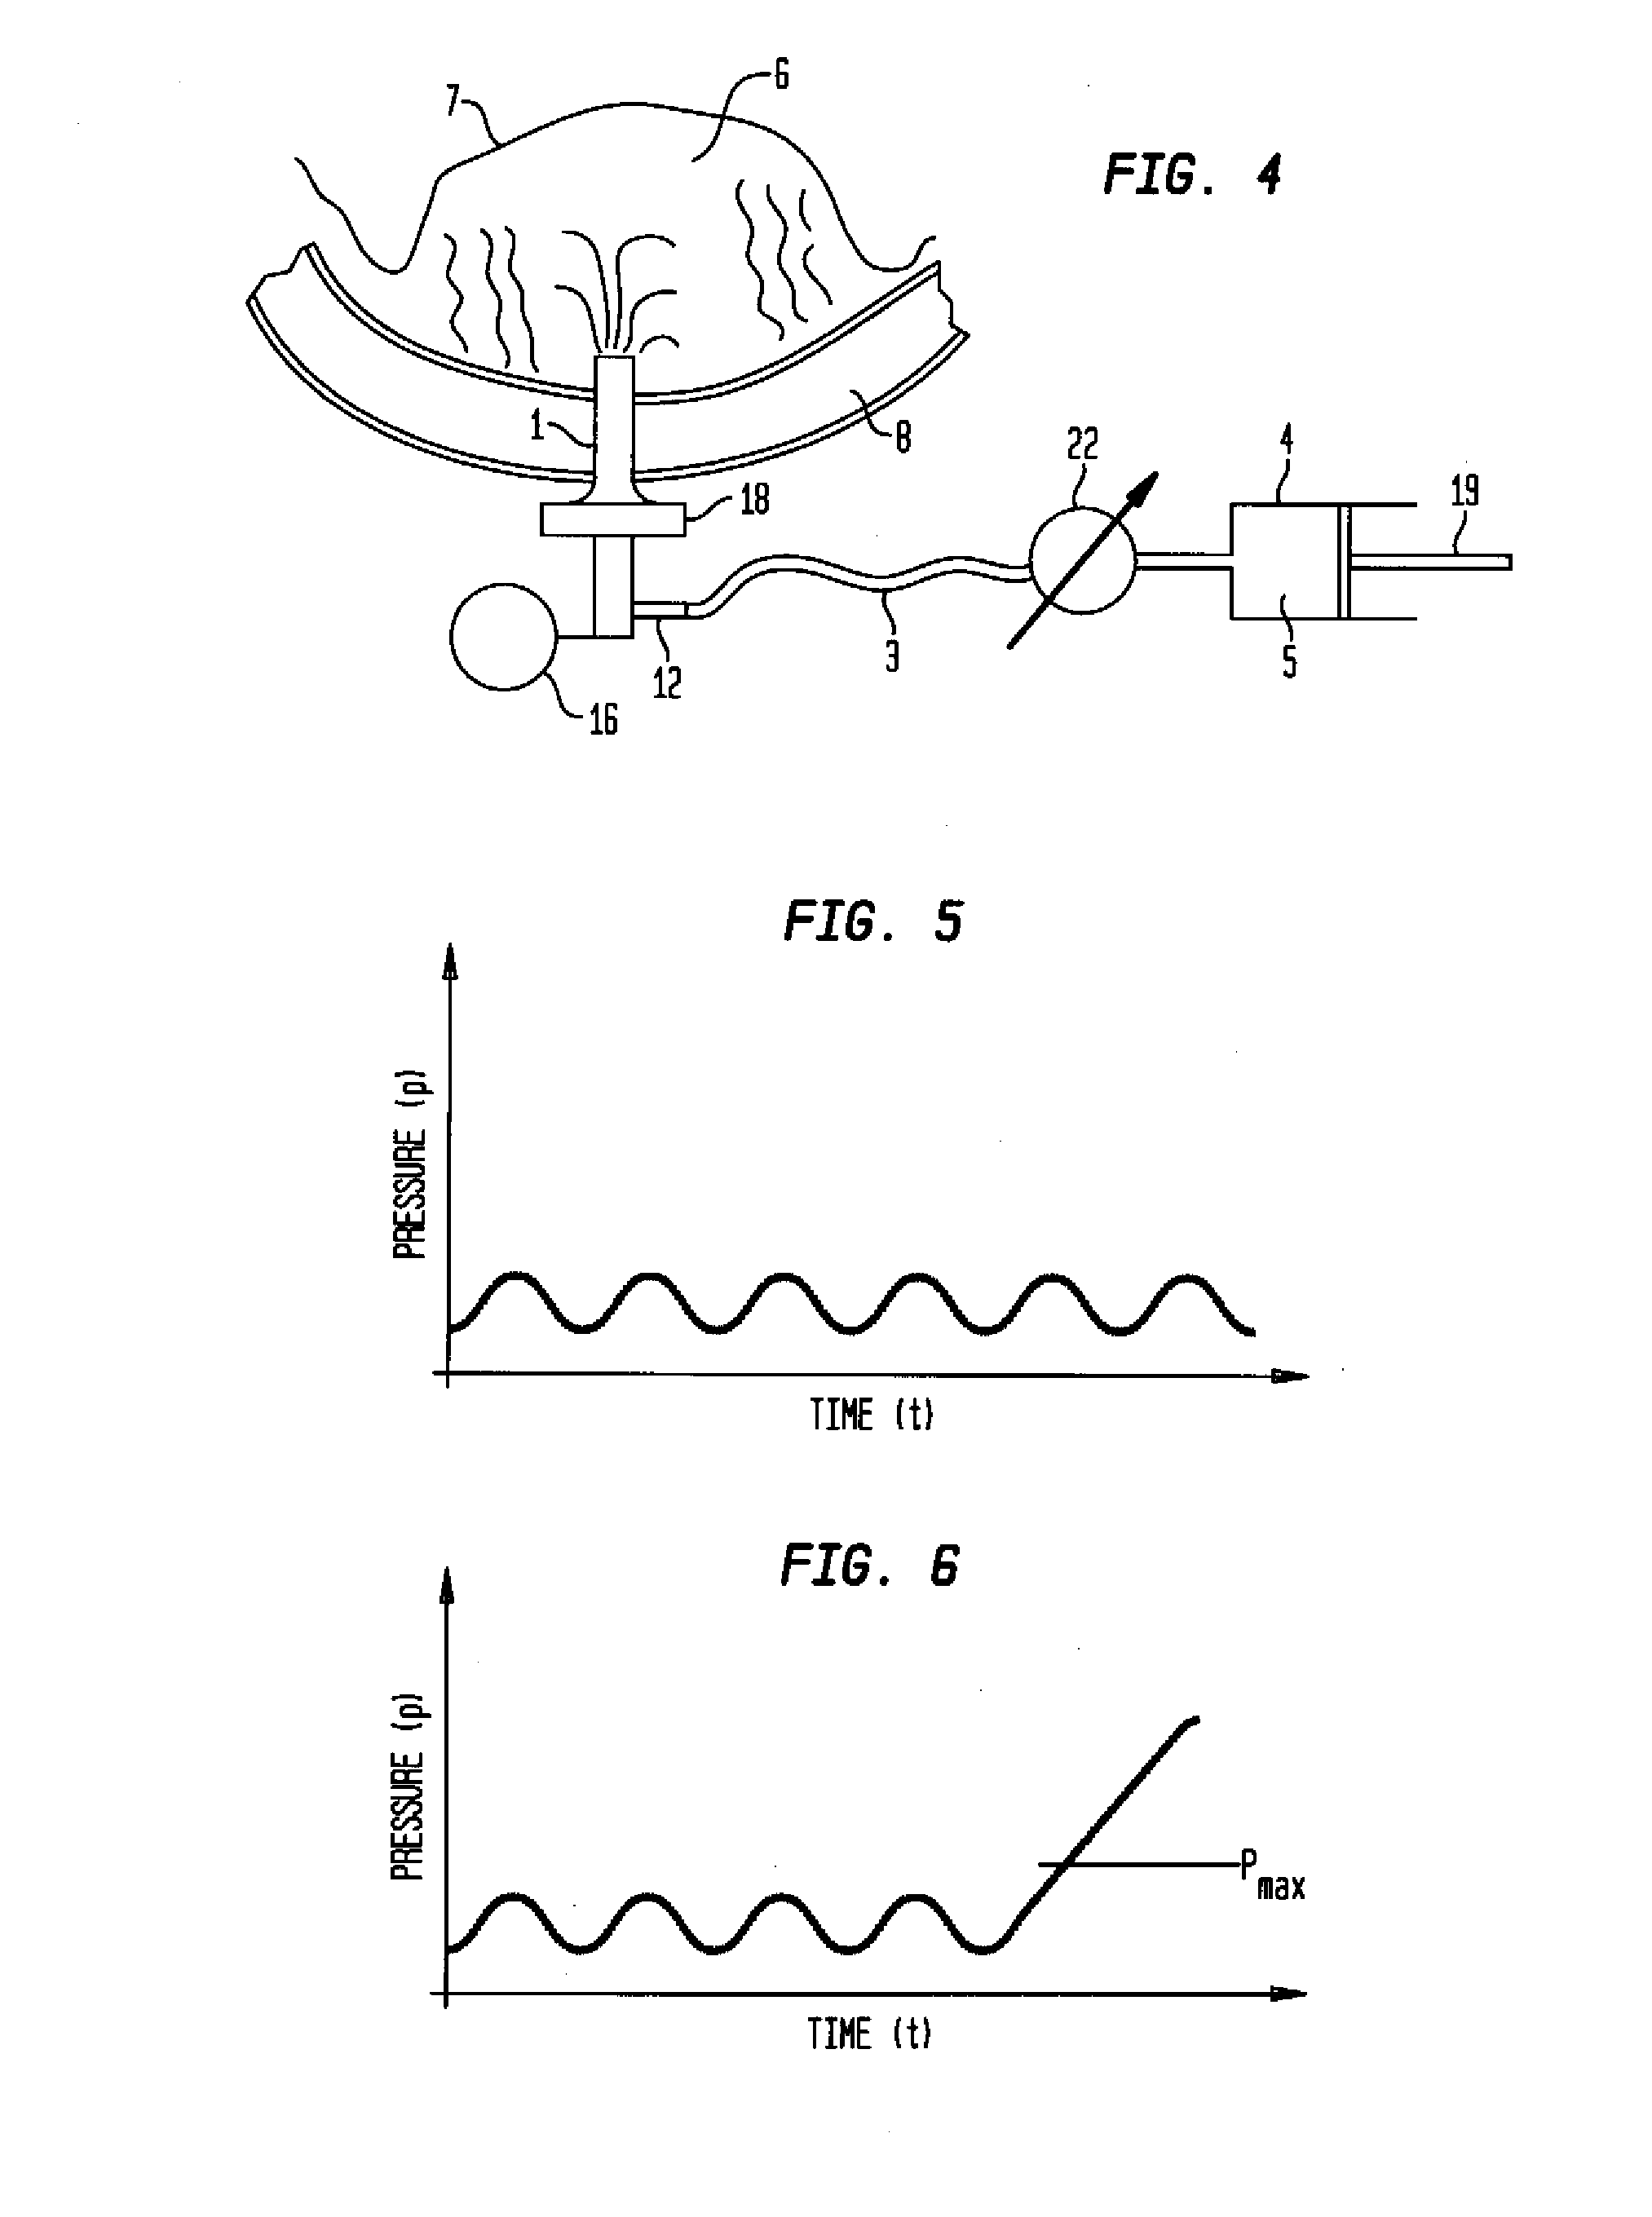 Surgical instrument and method for improving a crestal sinus lift